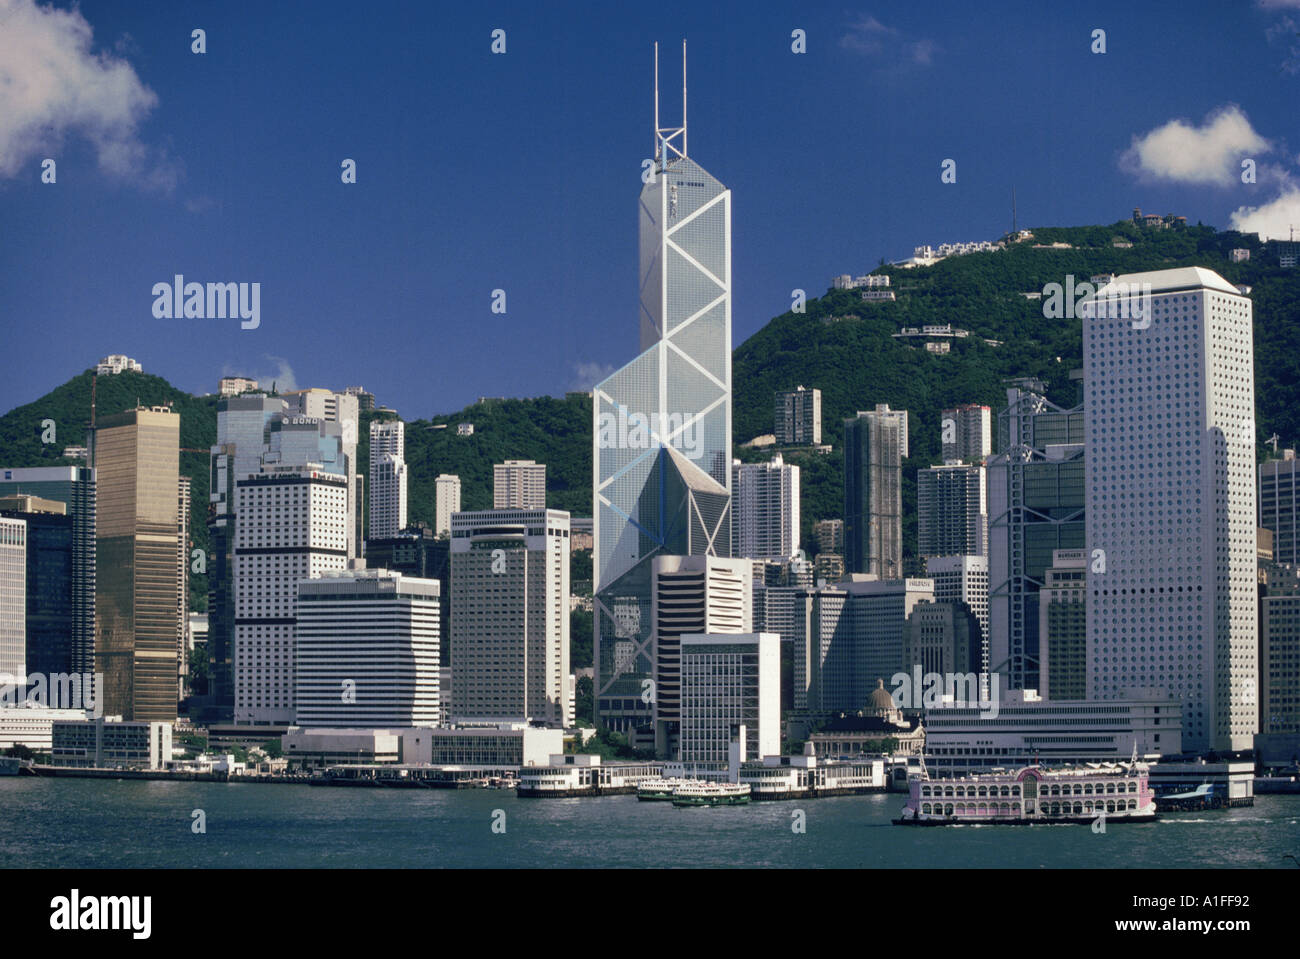 The city skyline from the harbour with the Bank of China in the centre on Hong Kong Island Asia G Hellier Stock Photo